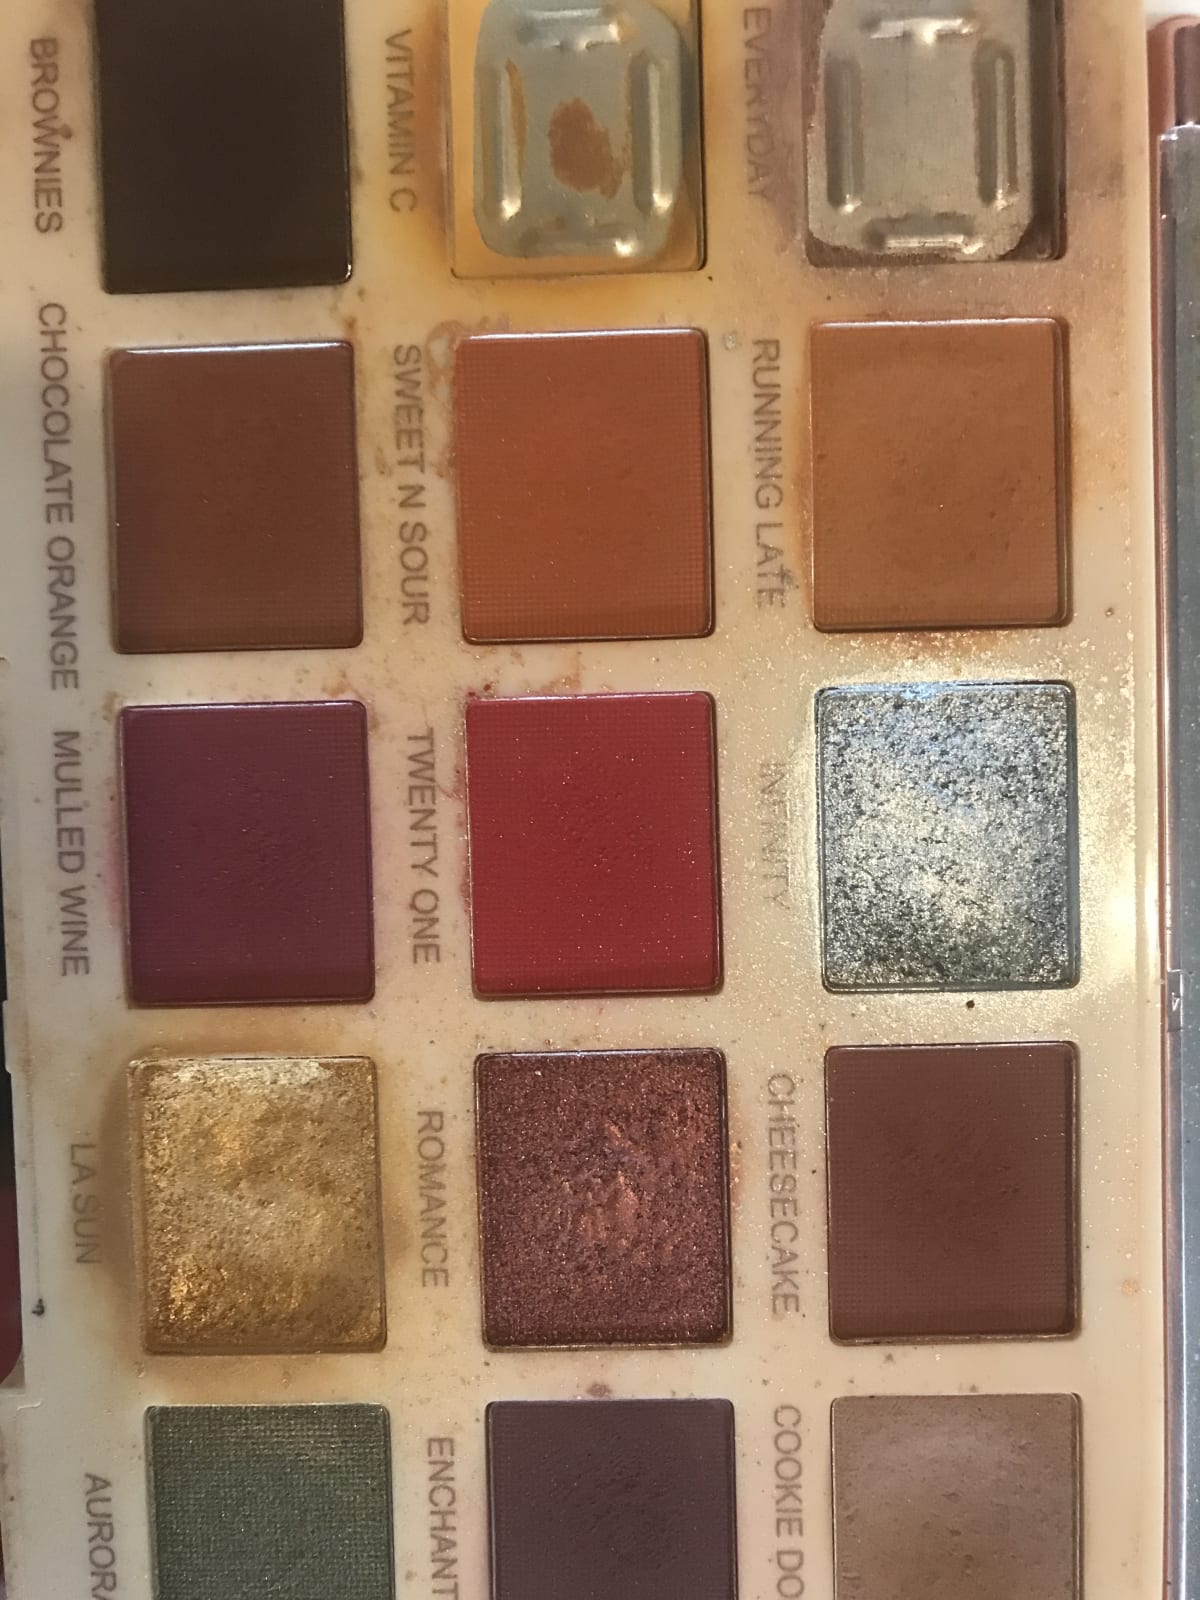 Makeup Revolution Soph X Oogschaduw Palette - Extra Spice - review image